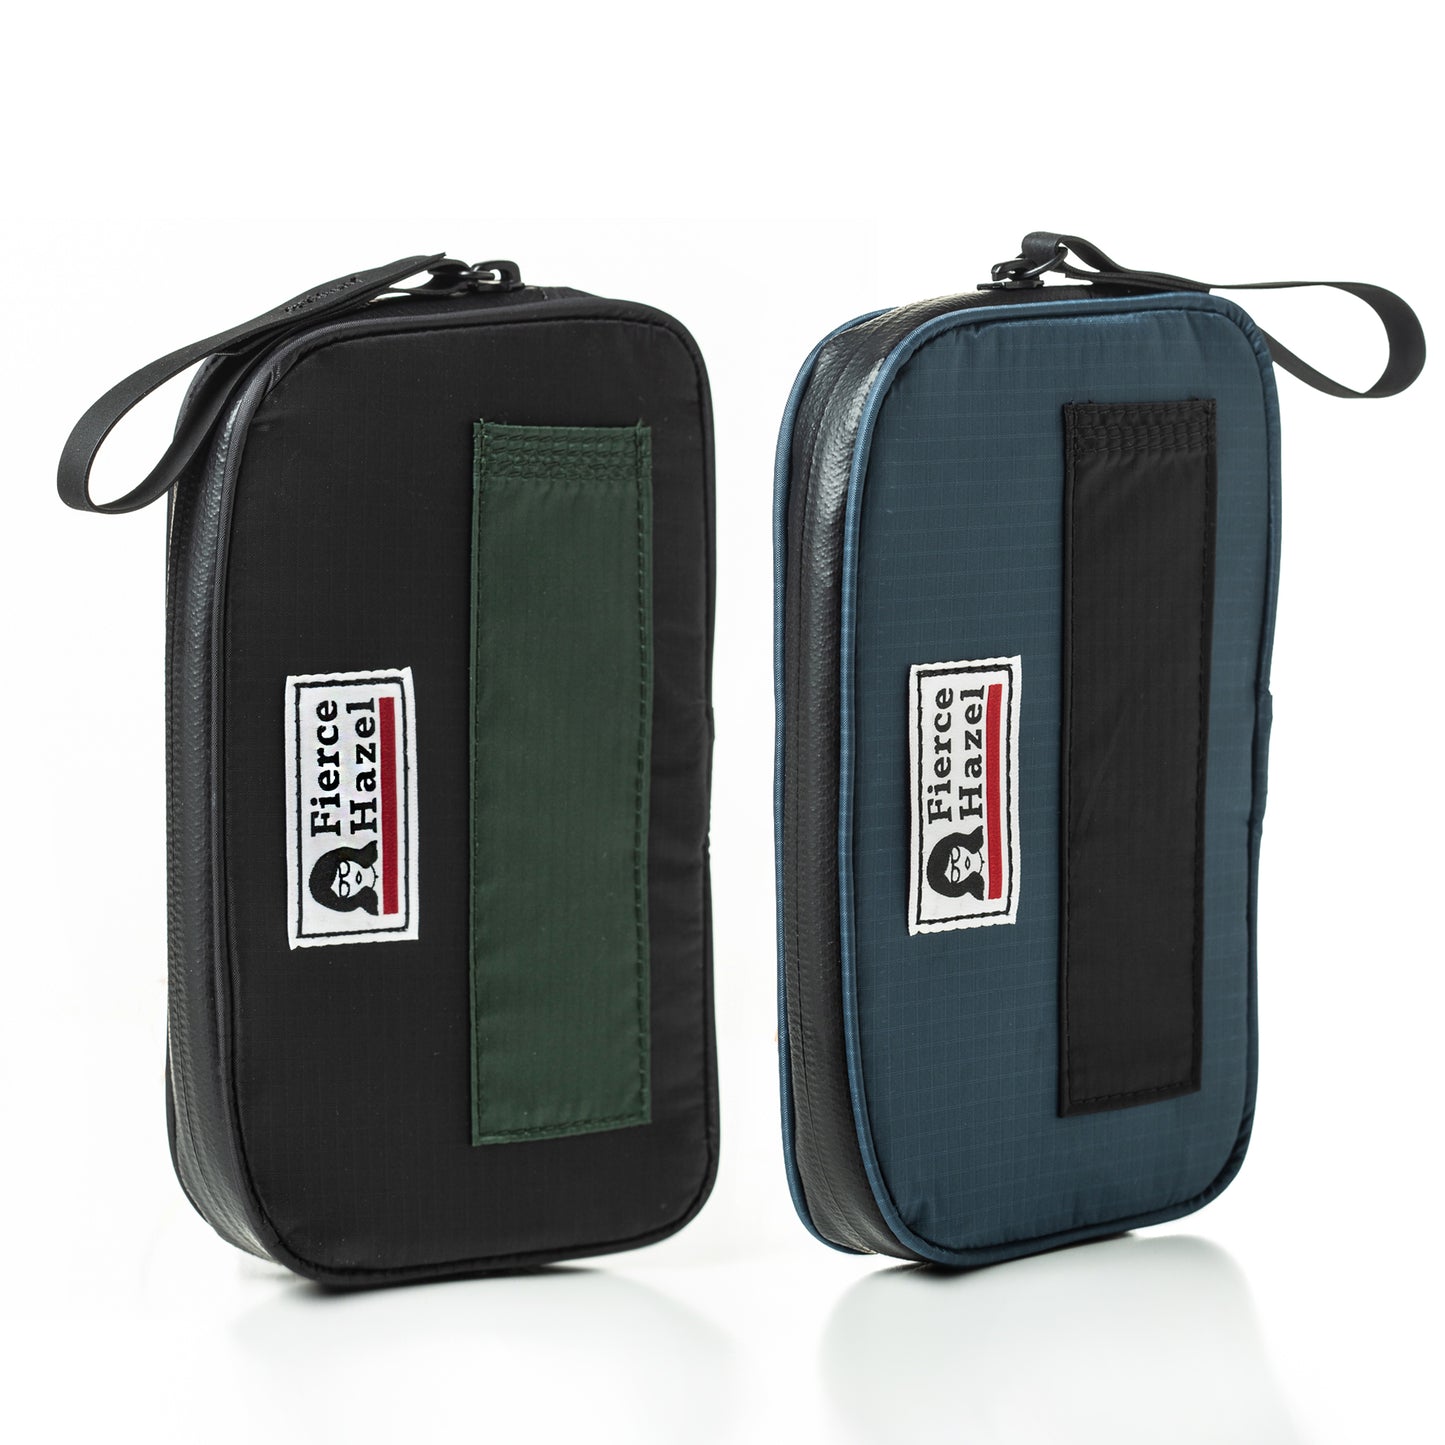 Two color ways of The front of the world's lightest cycling ride wallet. Ultra-lightweight, weather-proof, made from deadstock. Works as a phone case and travel wallet